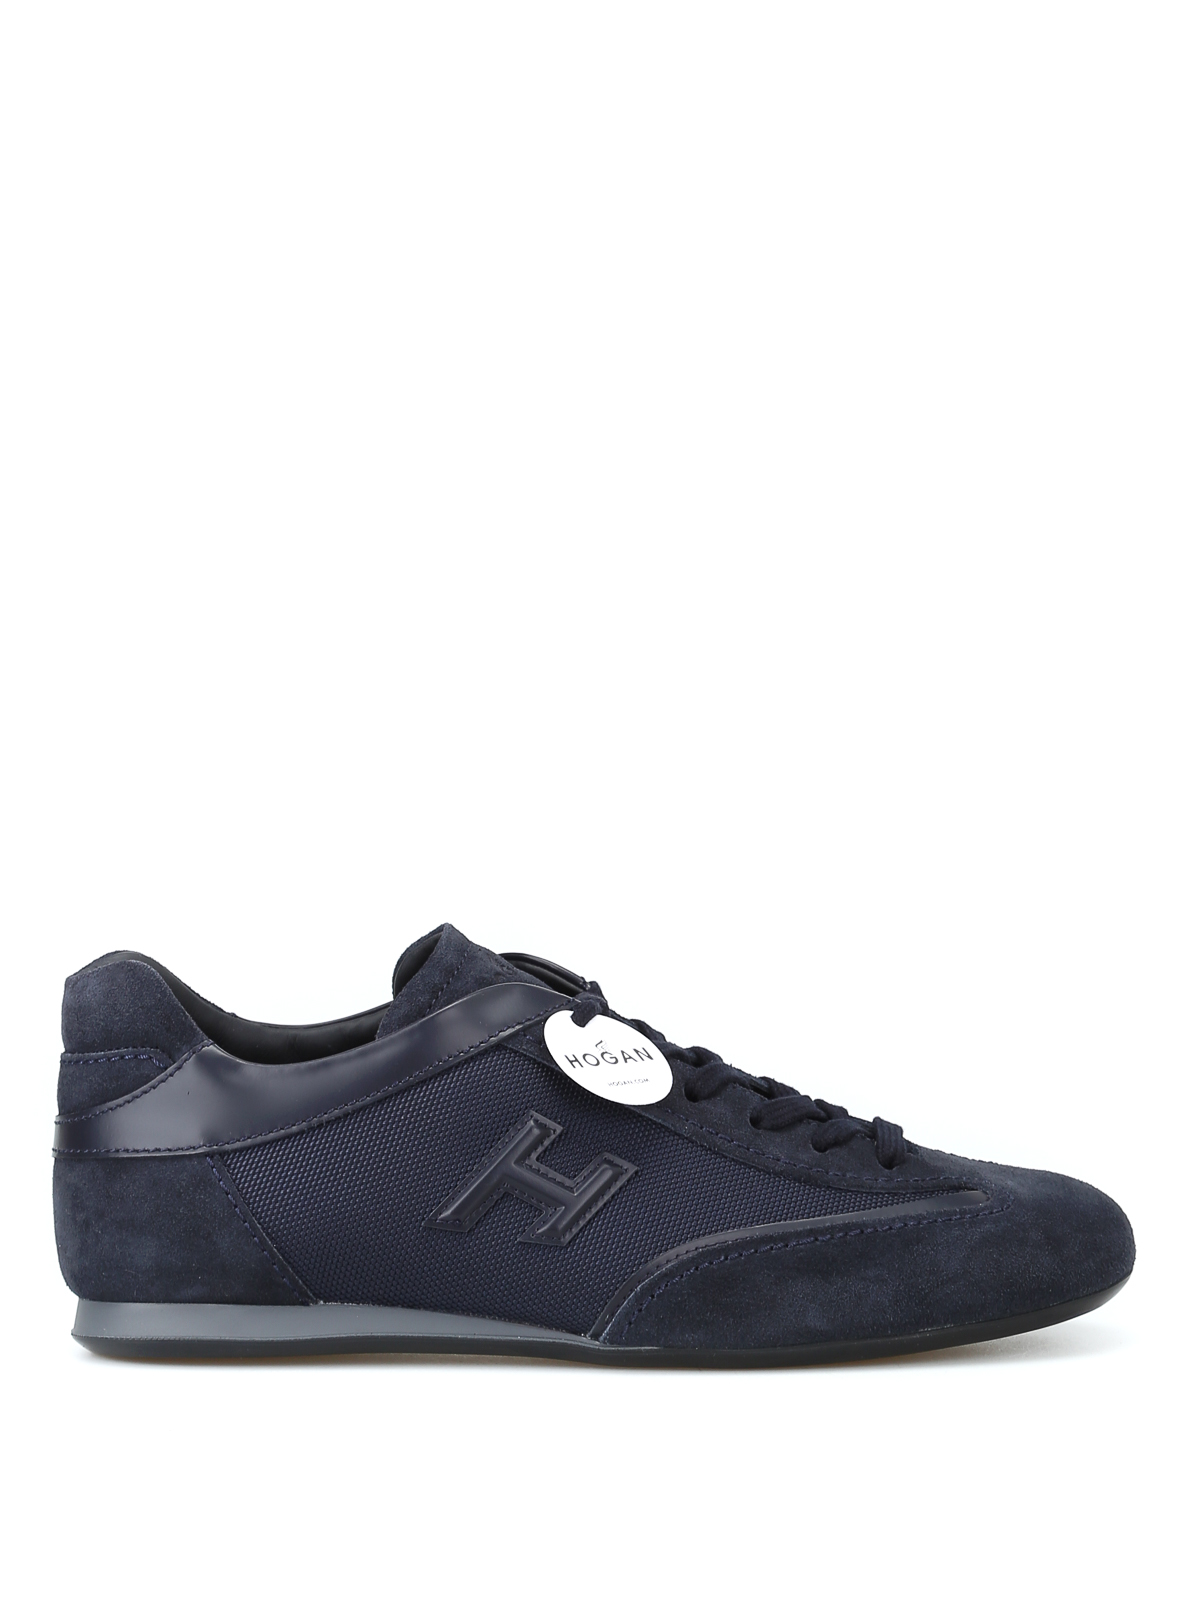 Trainers Hogan - Olympia blue low top sneakers - HXM0570I972JC89E7D